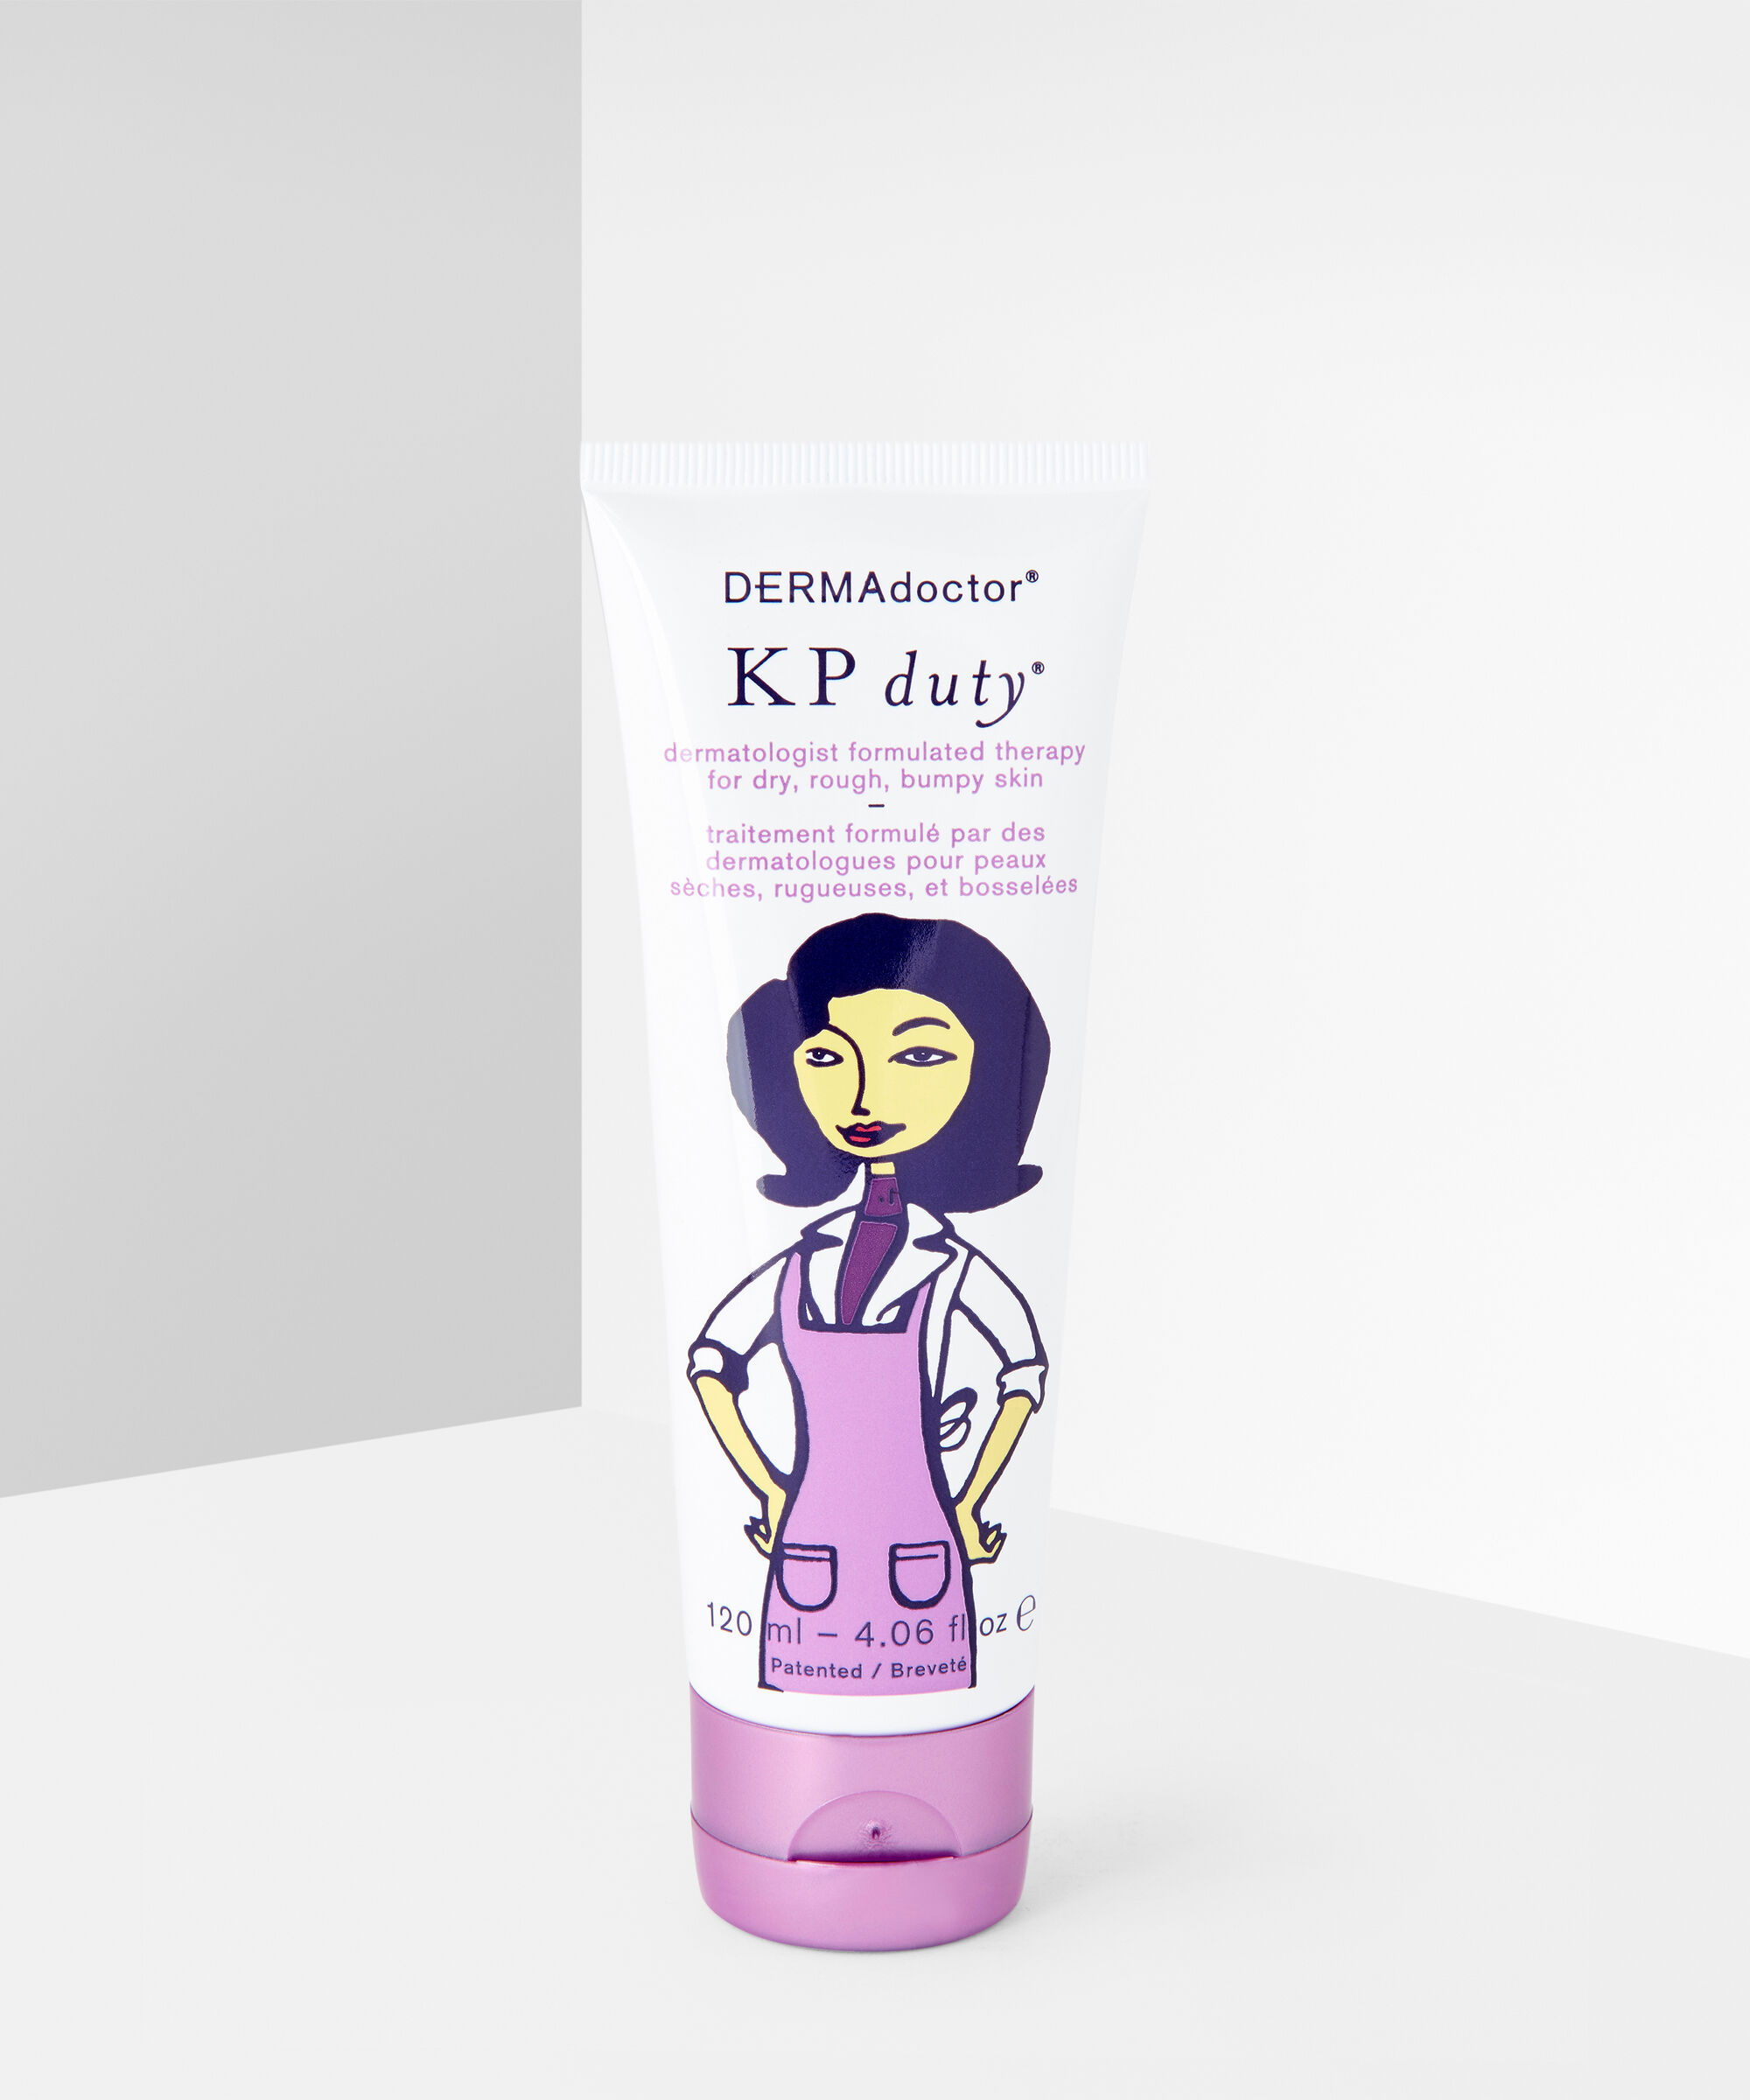 Dermadoctor - KP Duty Dermatologist Formulated AHA Moisturizing Therapy For Dry Skin